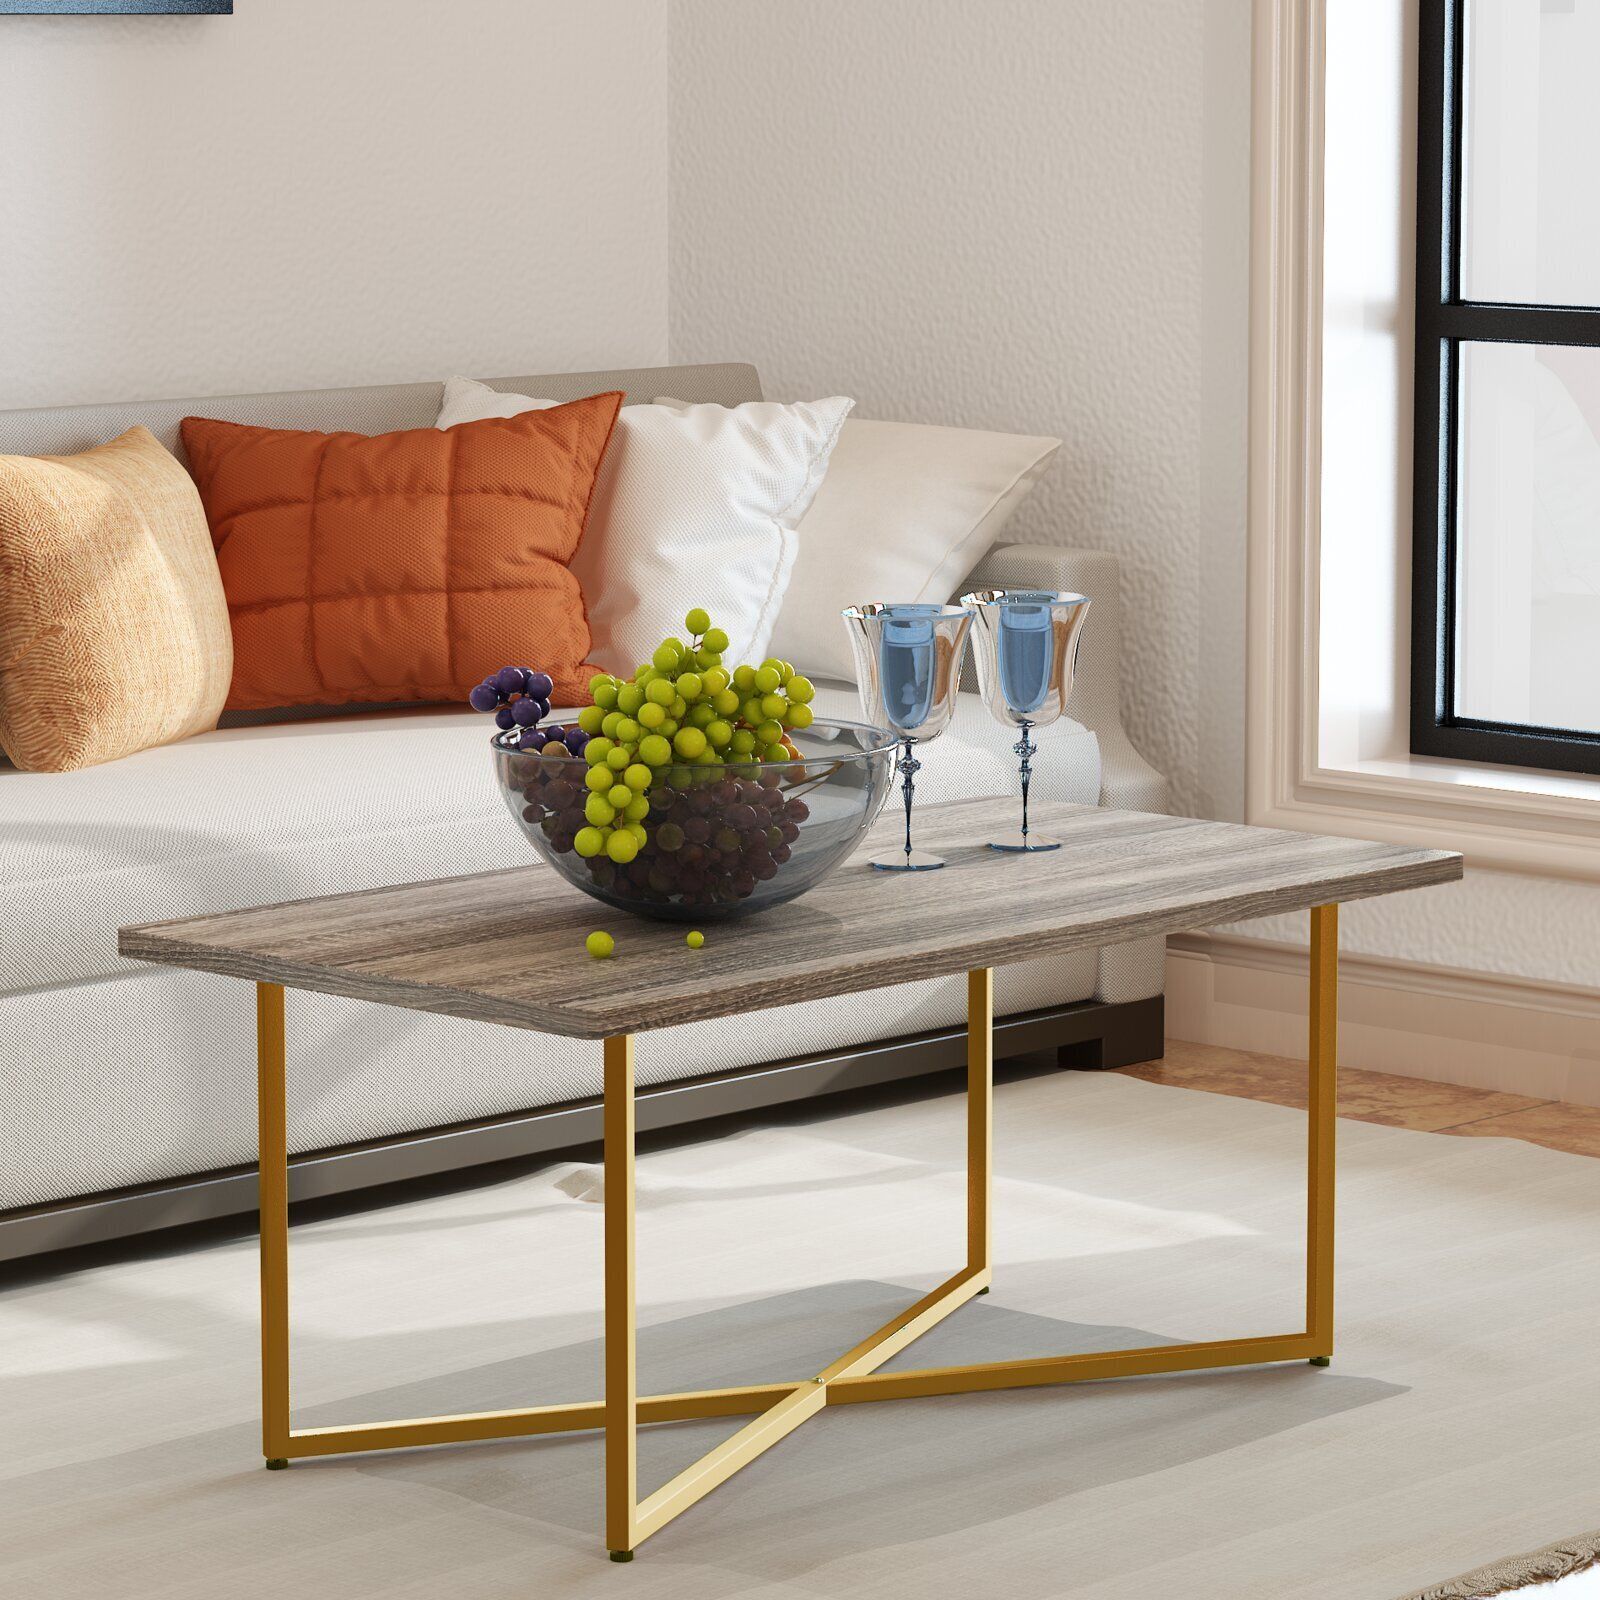 Wood And Chrome Coffee Table – Ideas On Foter Regarding Faux Wood Coffee Tables (View 15 of 20)